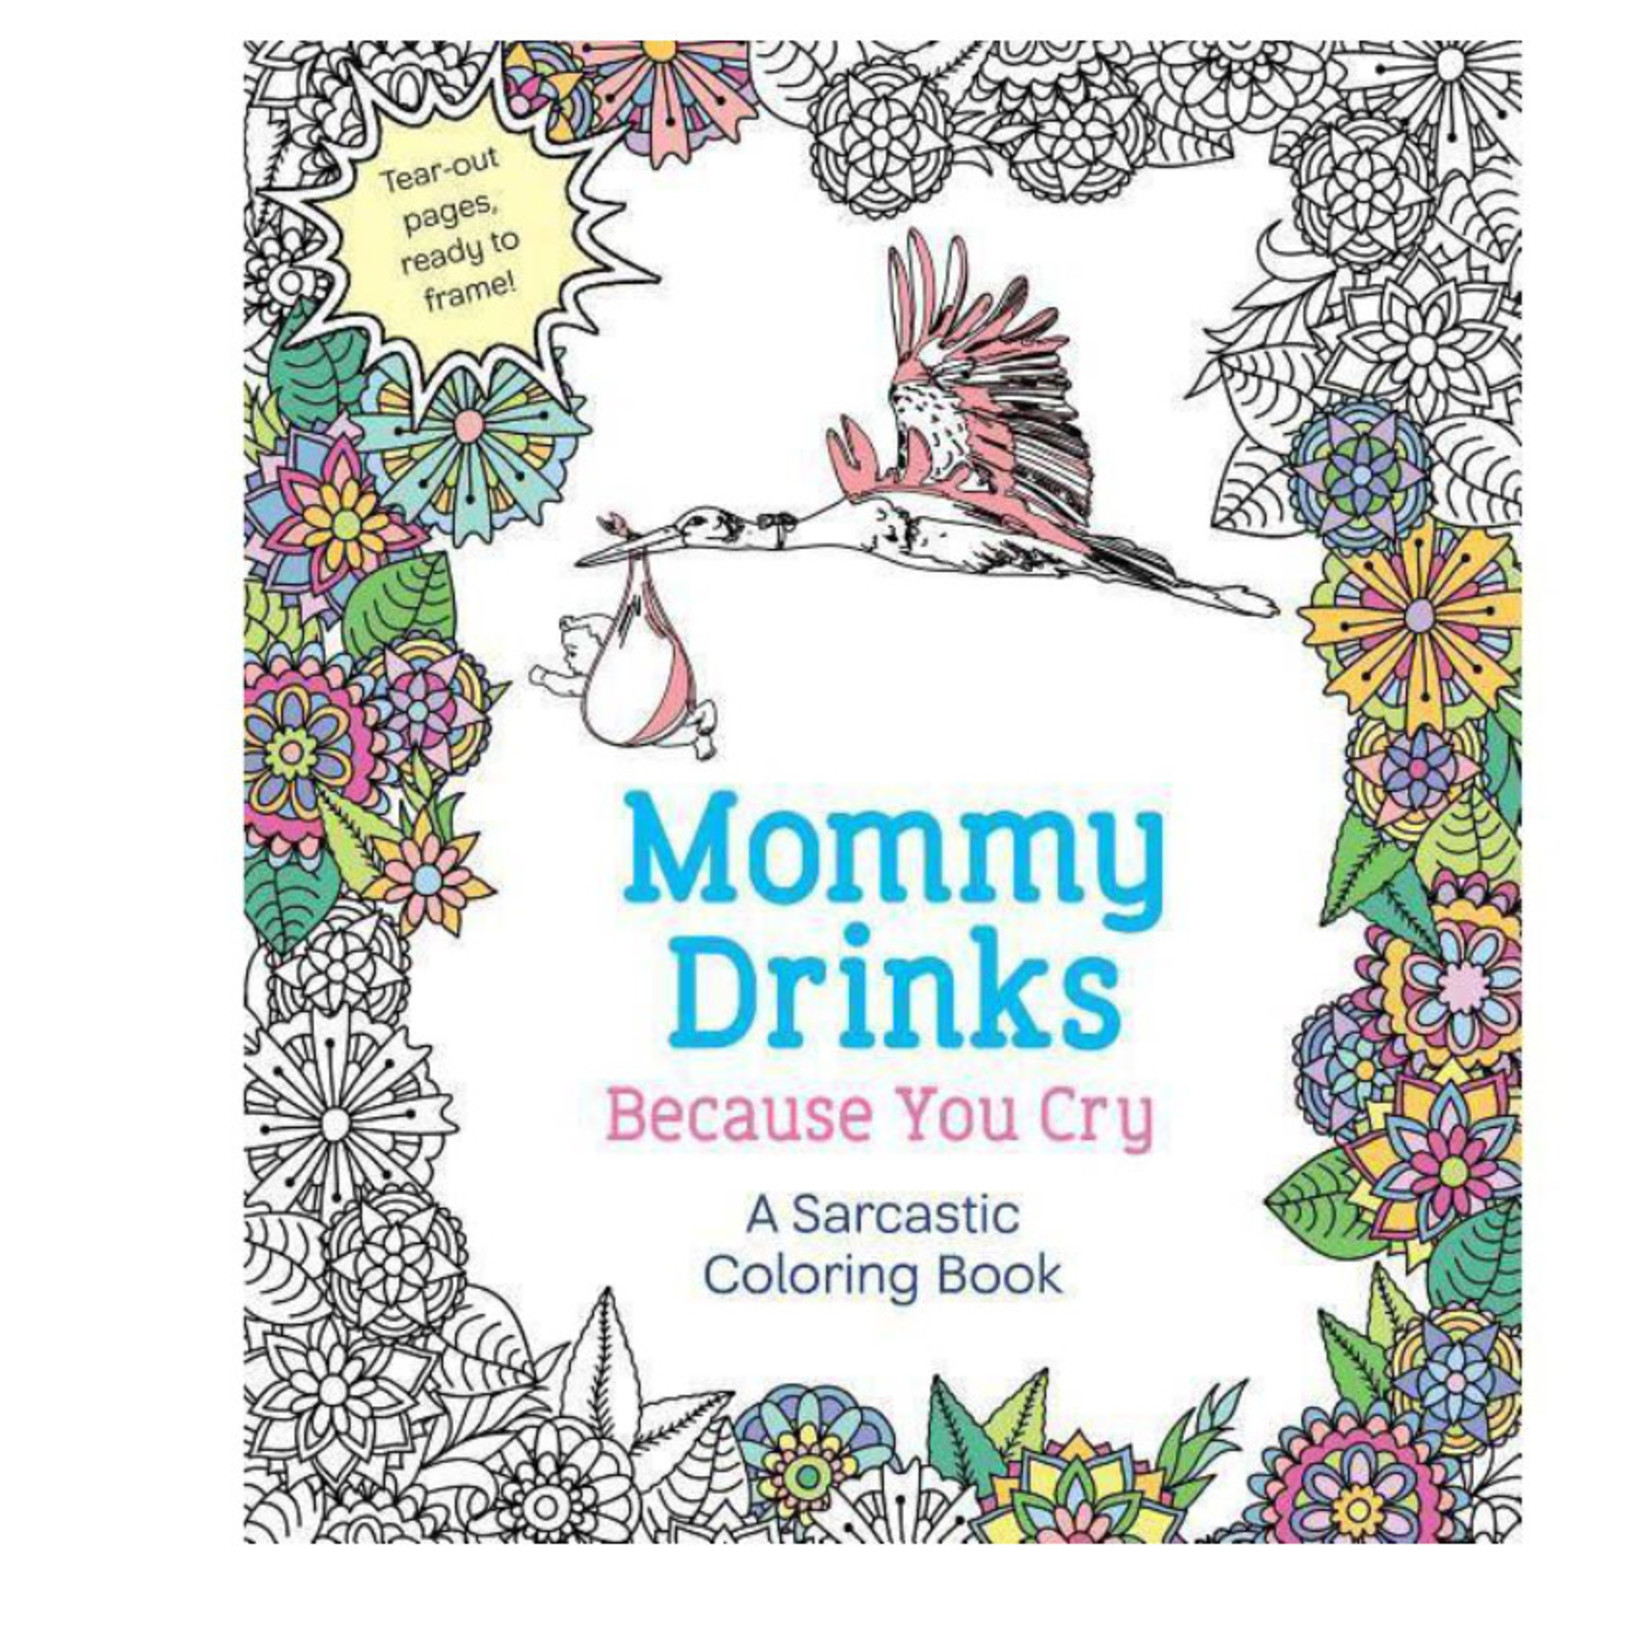 Mommy drinks cause you cry coloring book